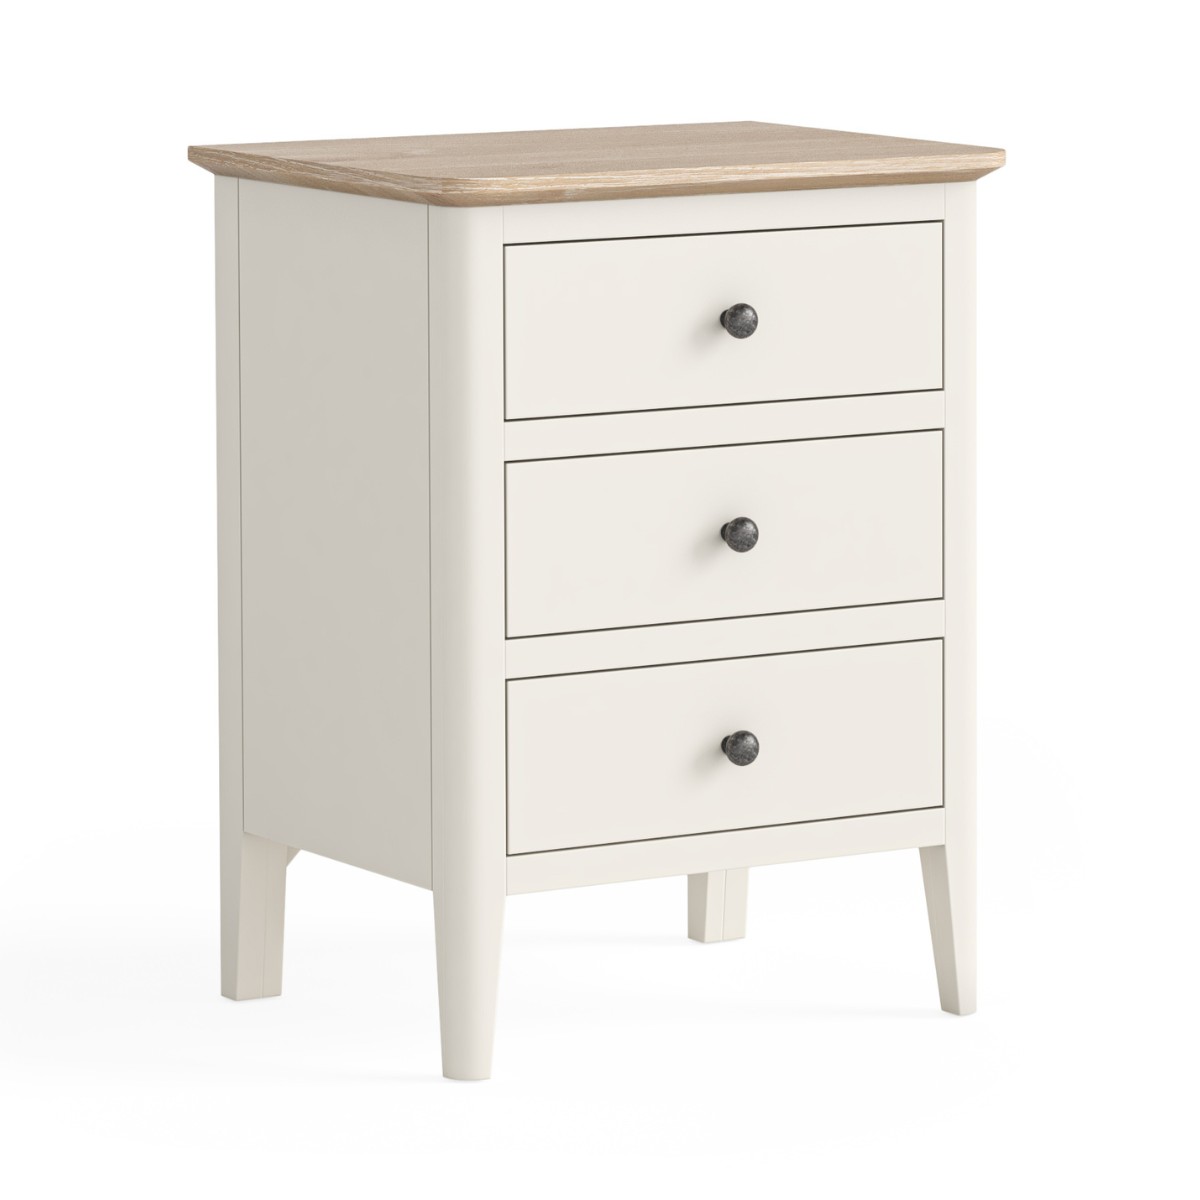 Marcella White Bedside Table - 1